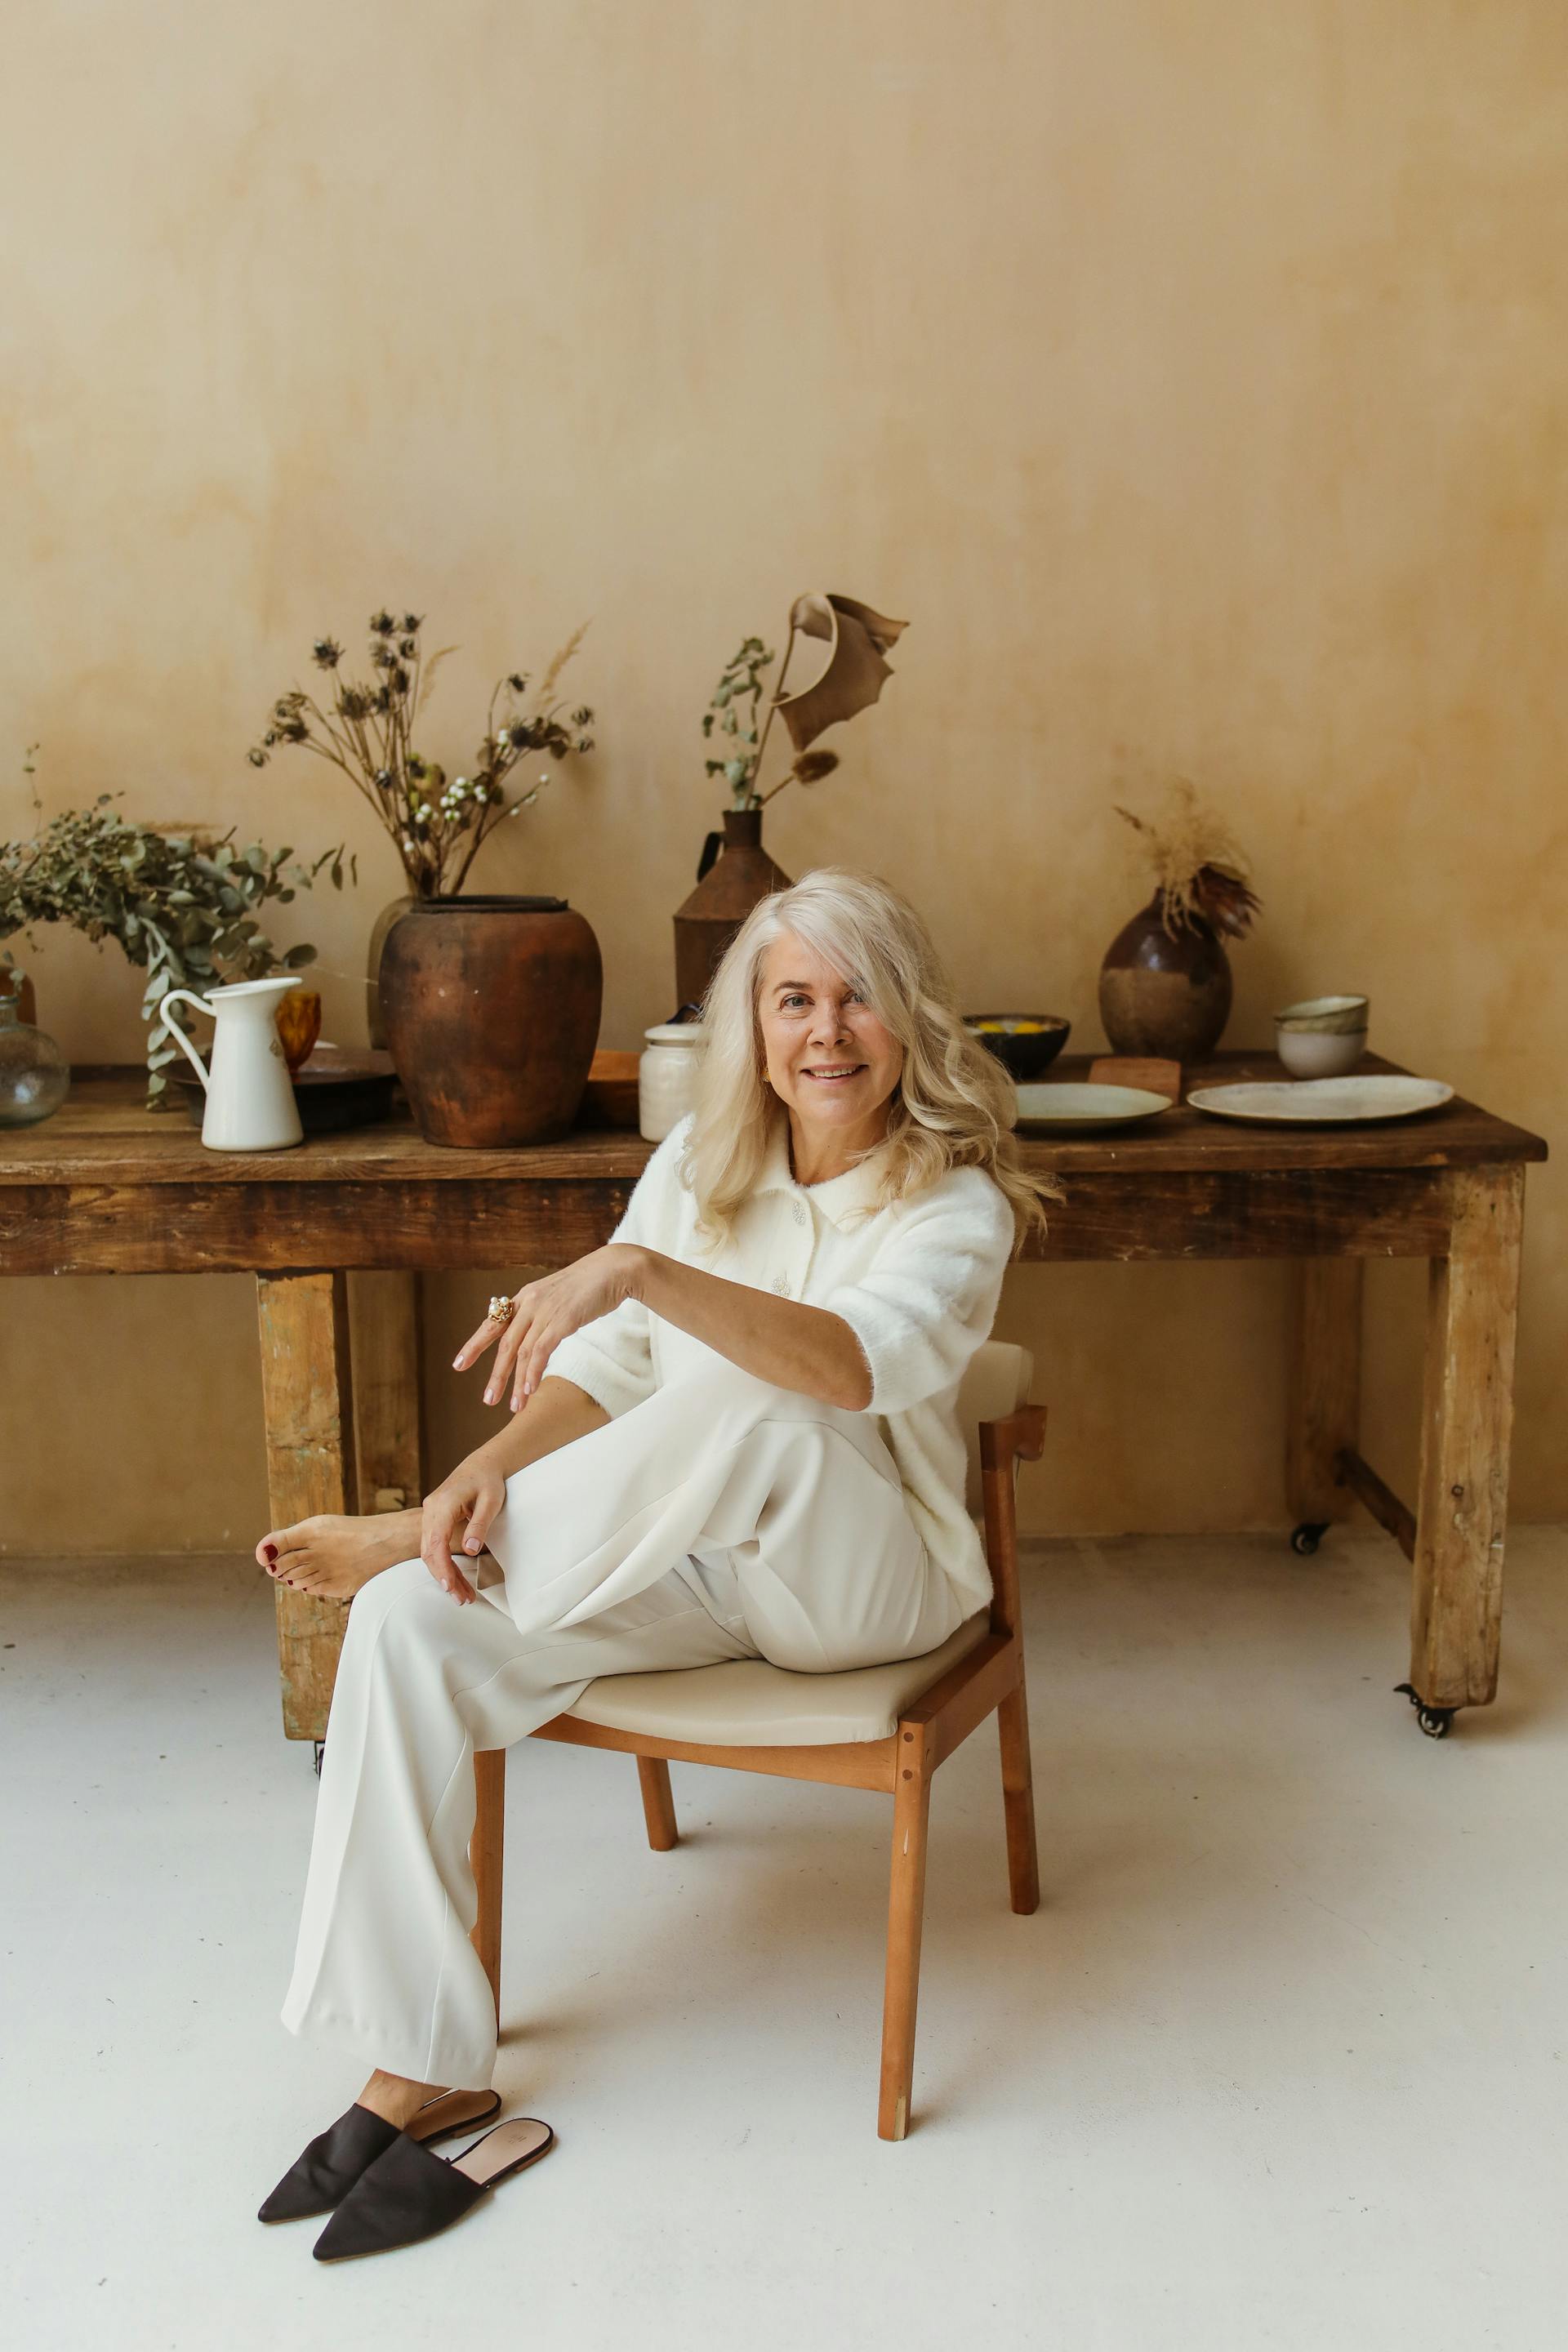 A smiling senior woman on a wooden chair | Source: Pexels